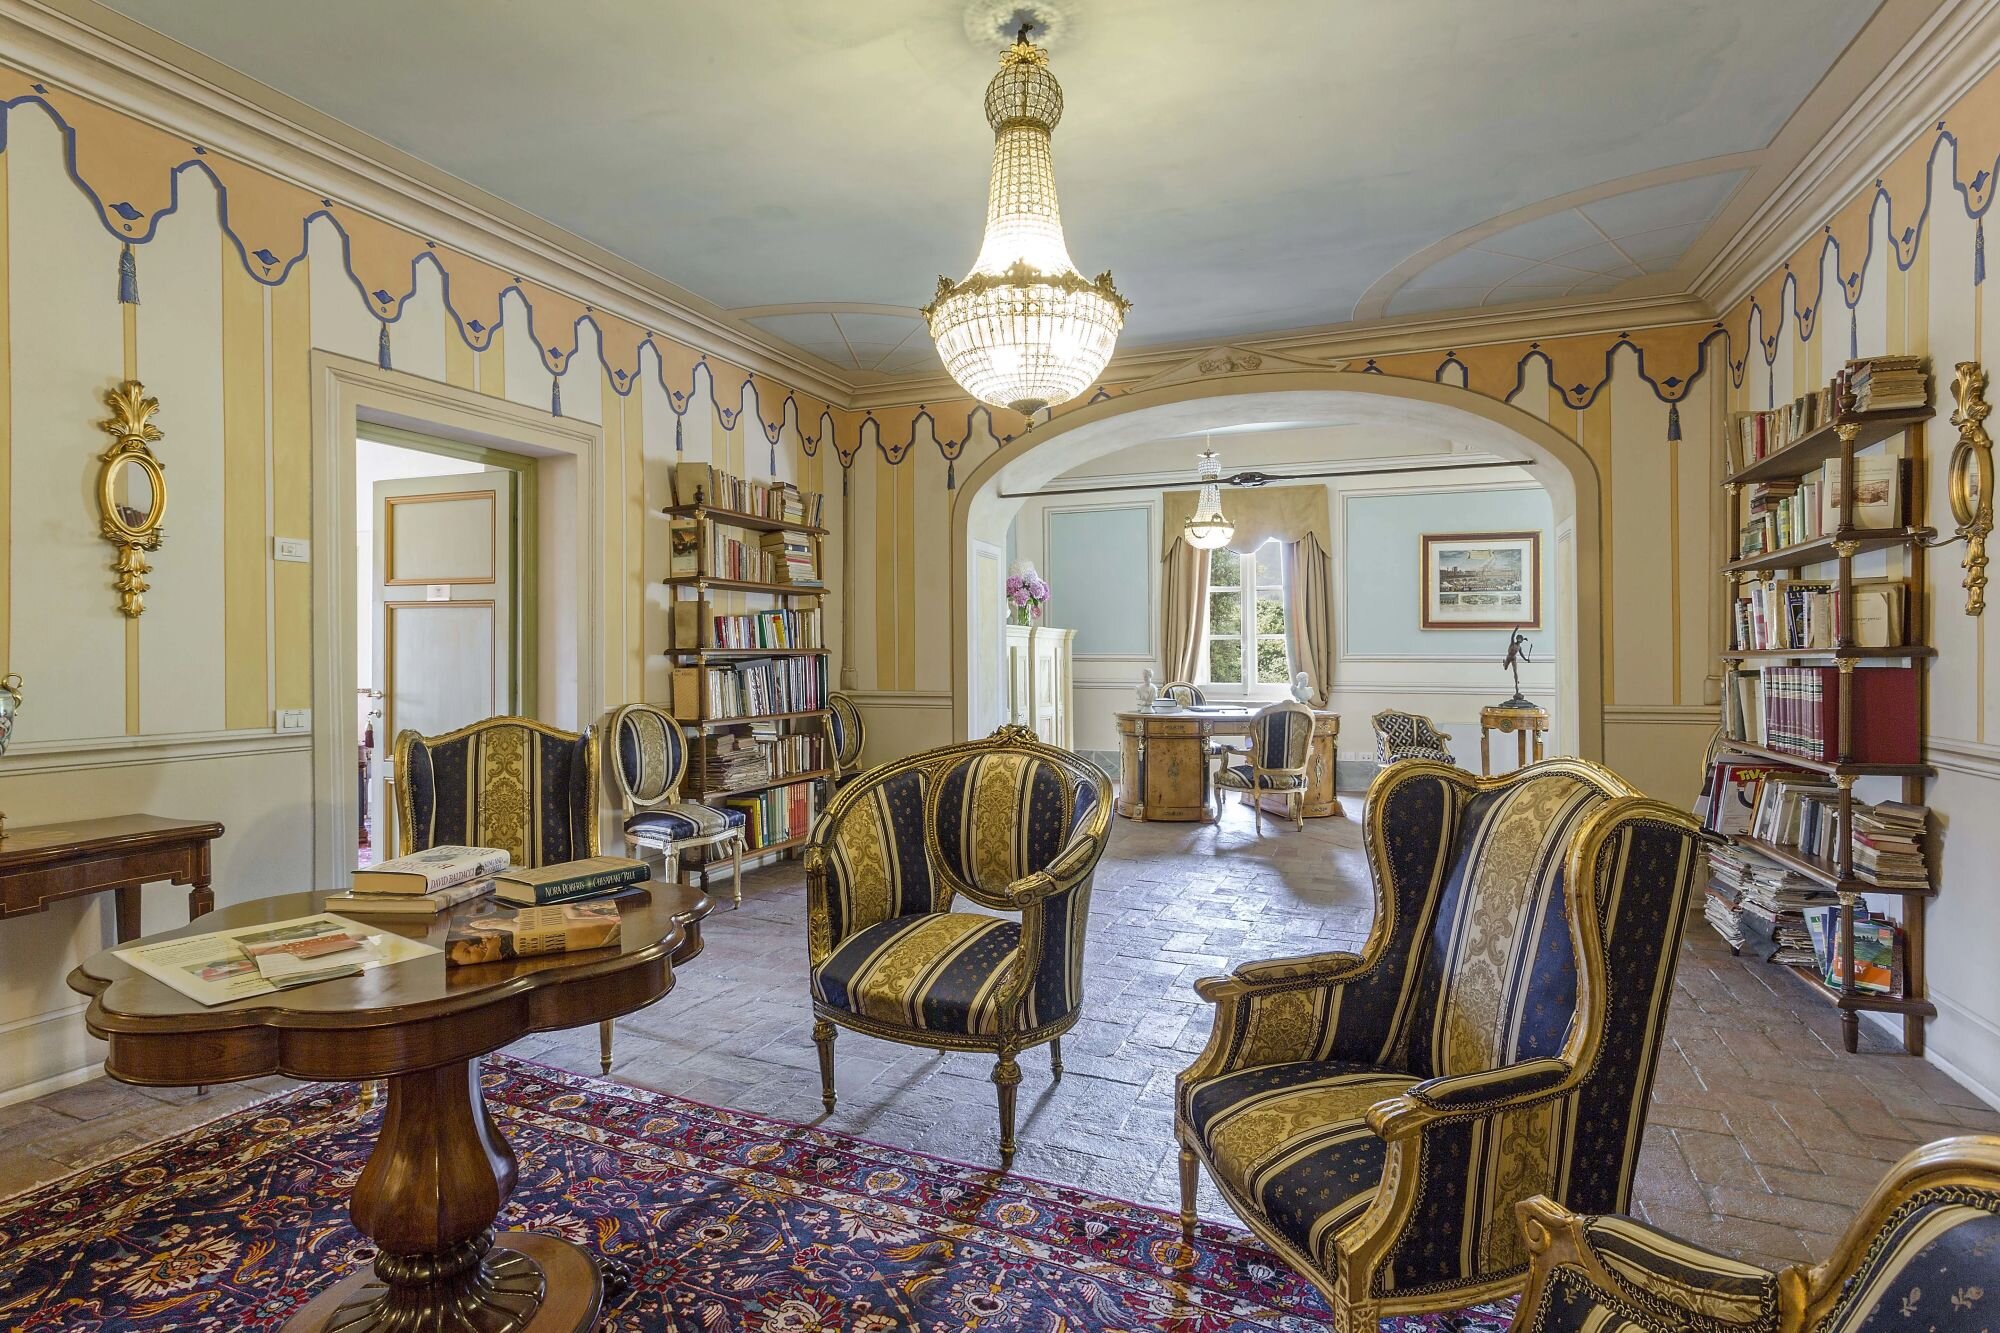 Francis York A Portfolio of Luxury Tuscan Villa Rentals is Coming to Auction23.jpeg